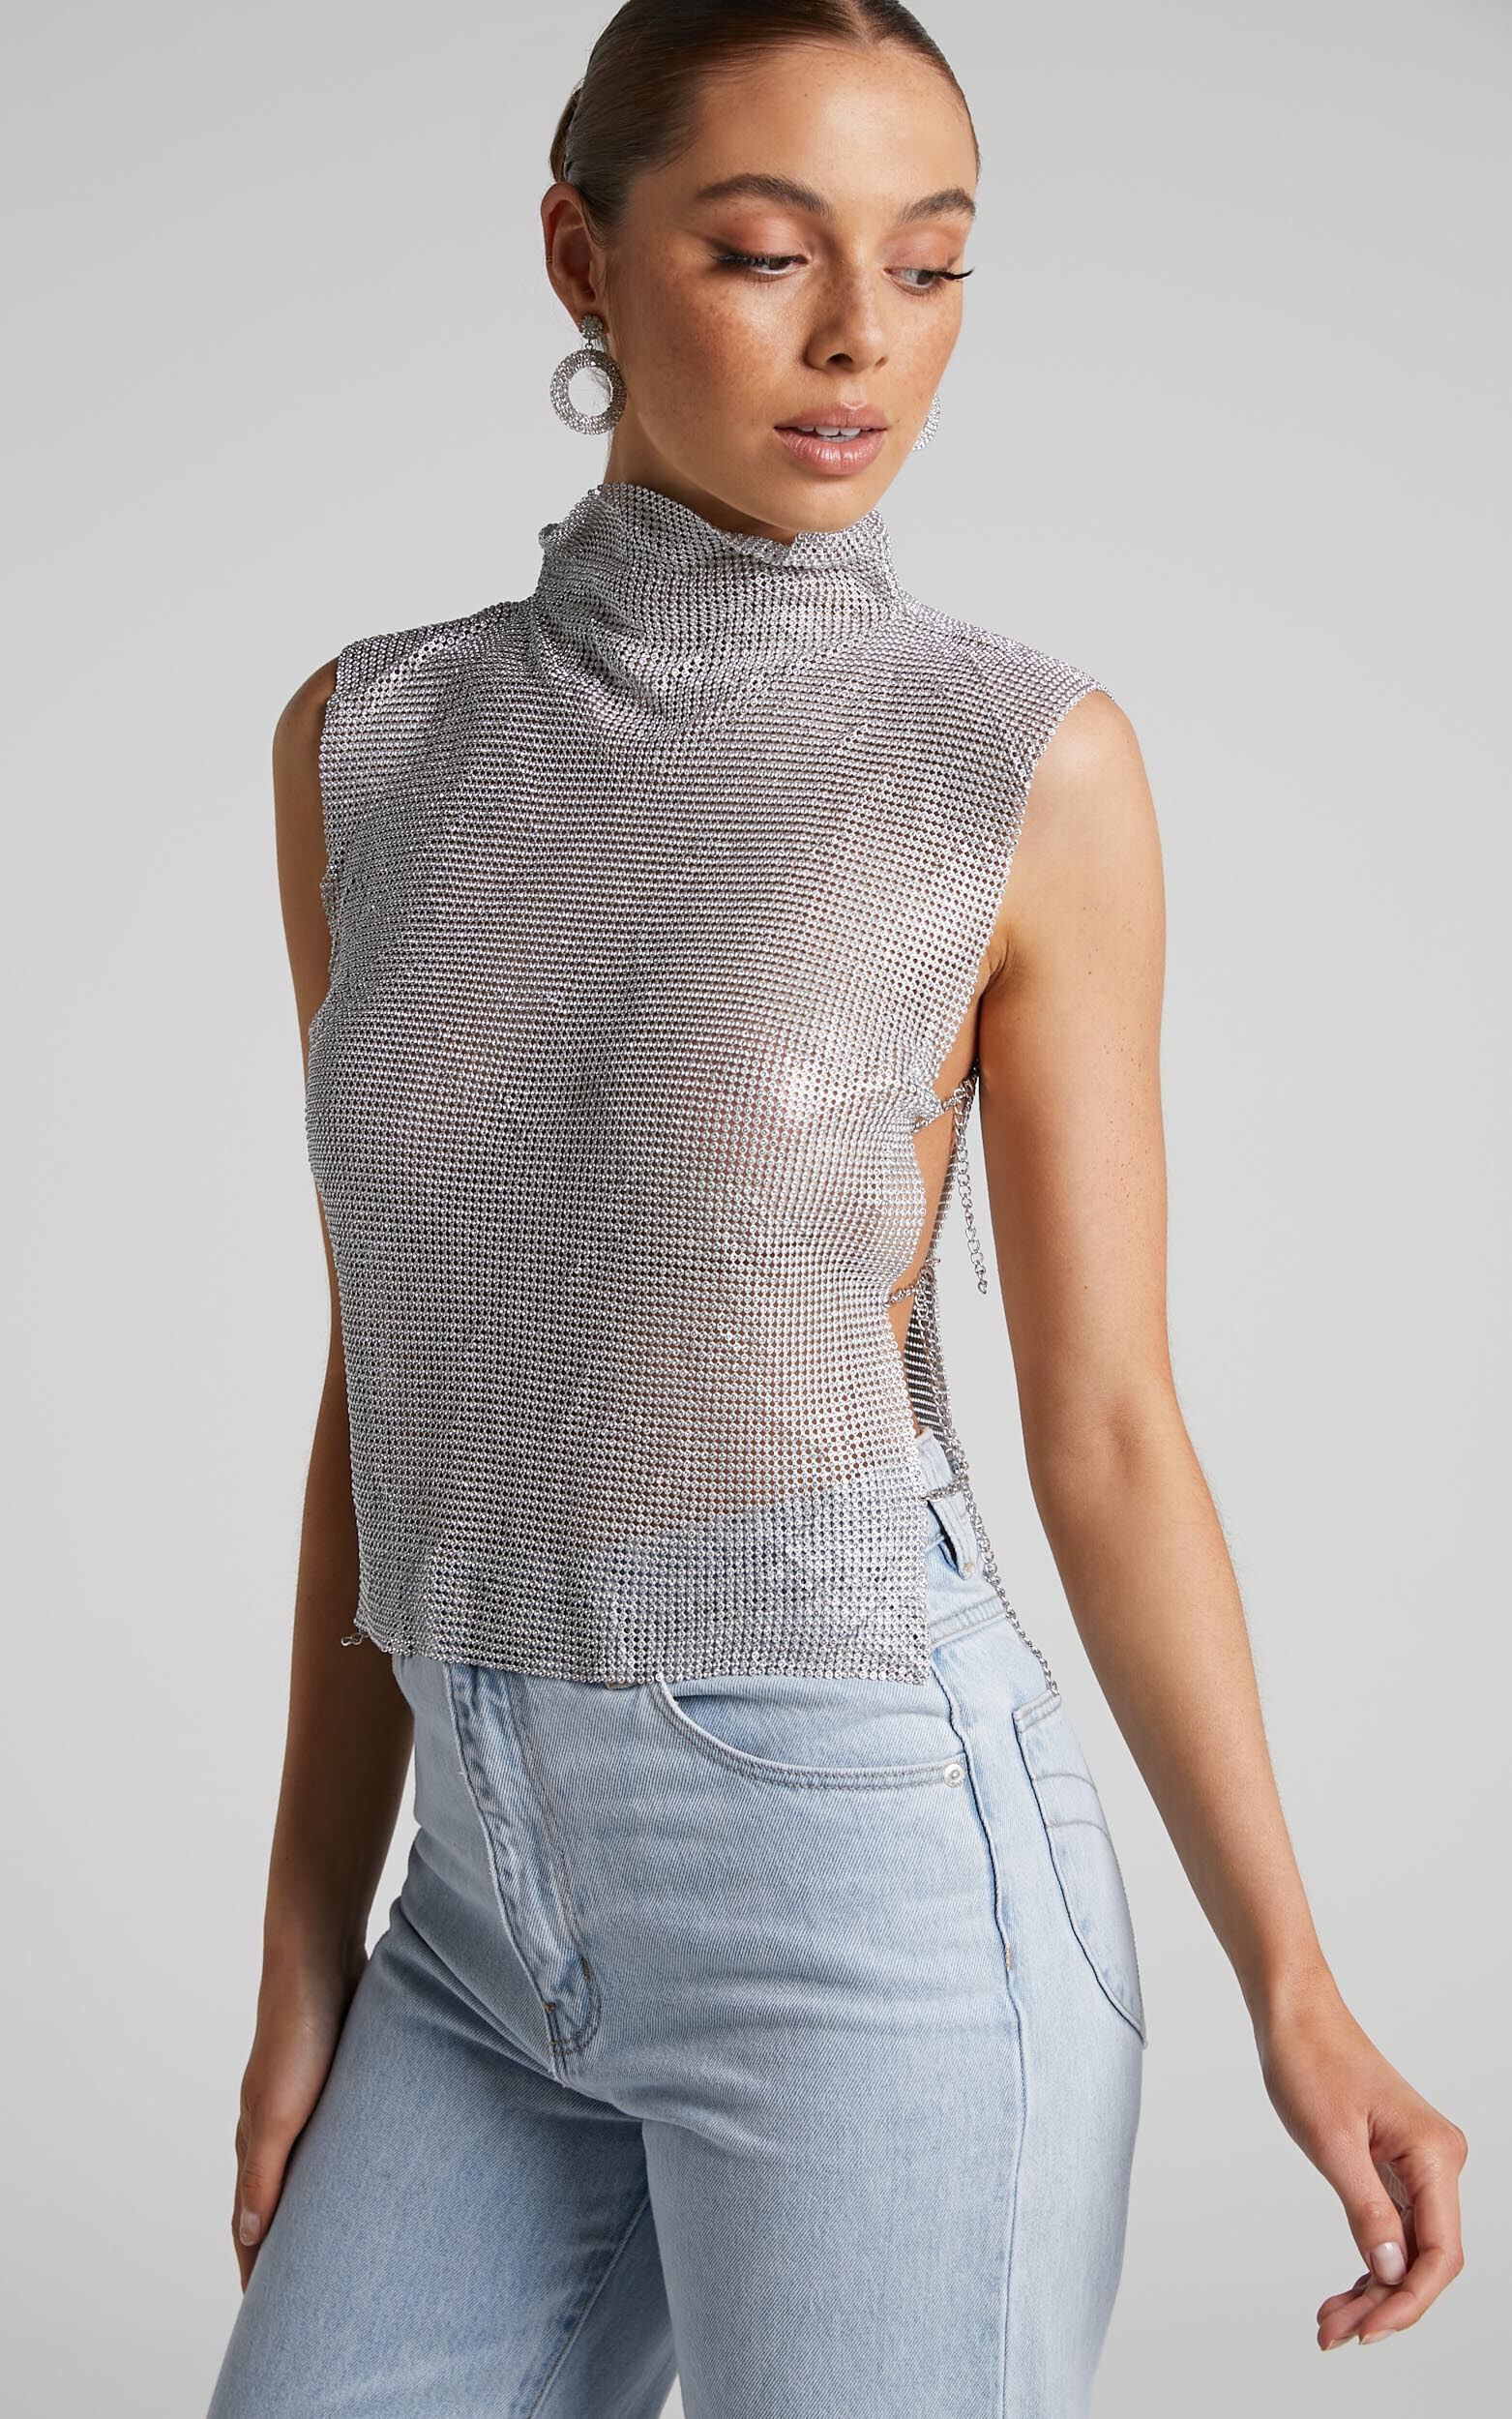 Dalena Top - Sleeveless High Neck Mesh Chainmail Top in Gold